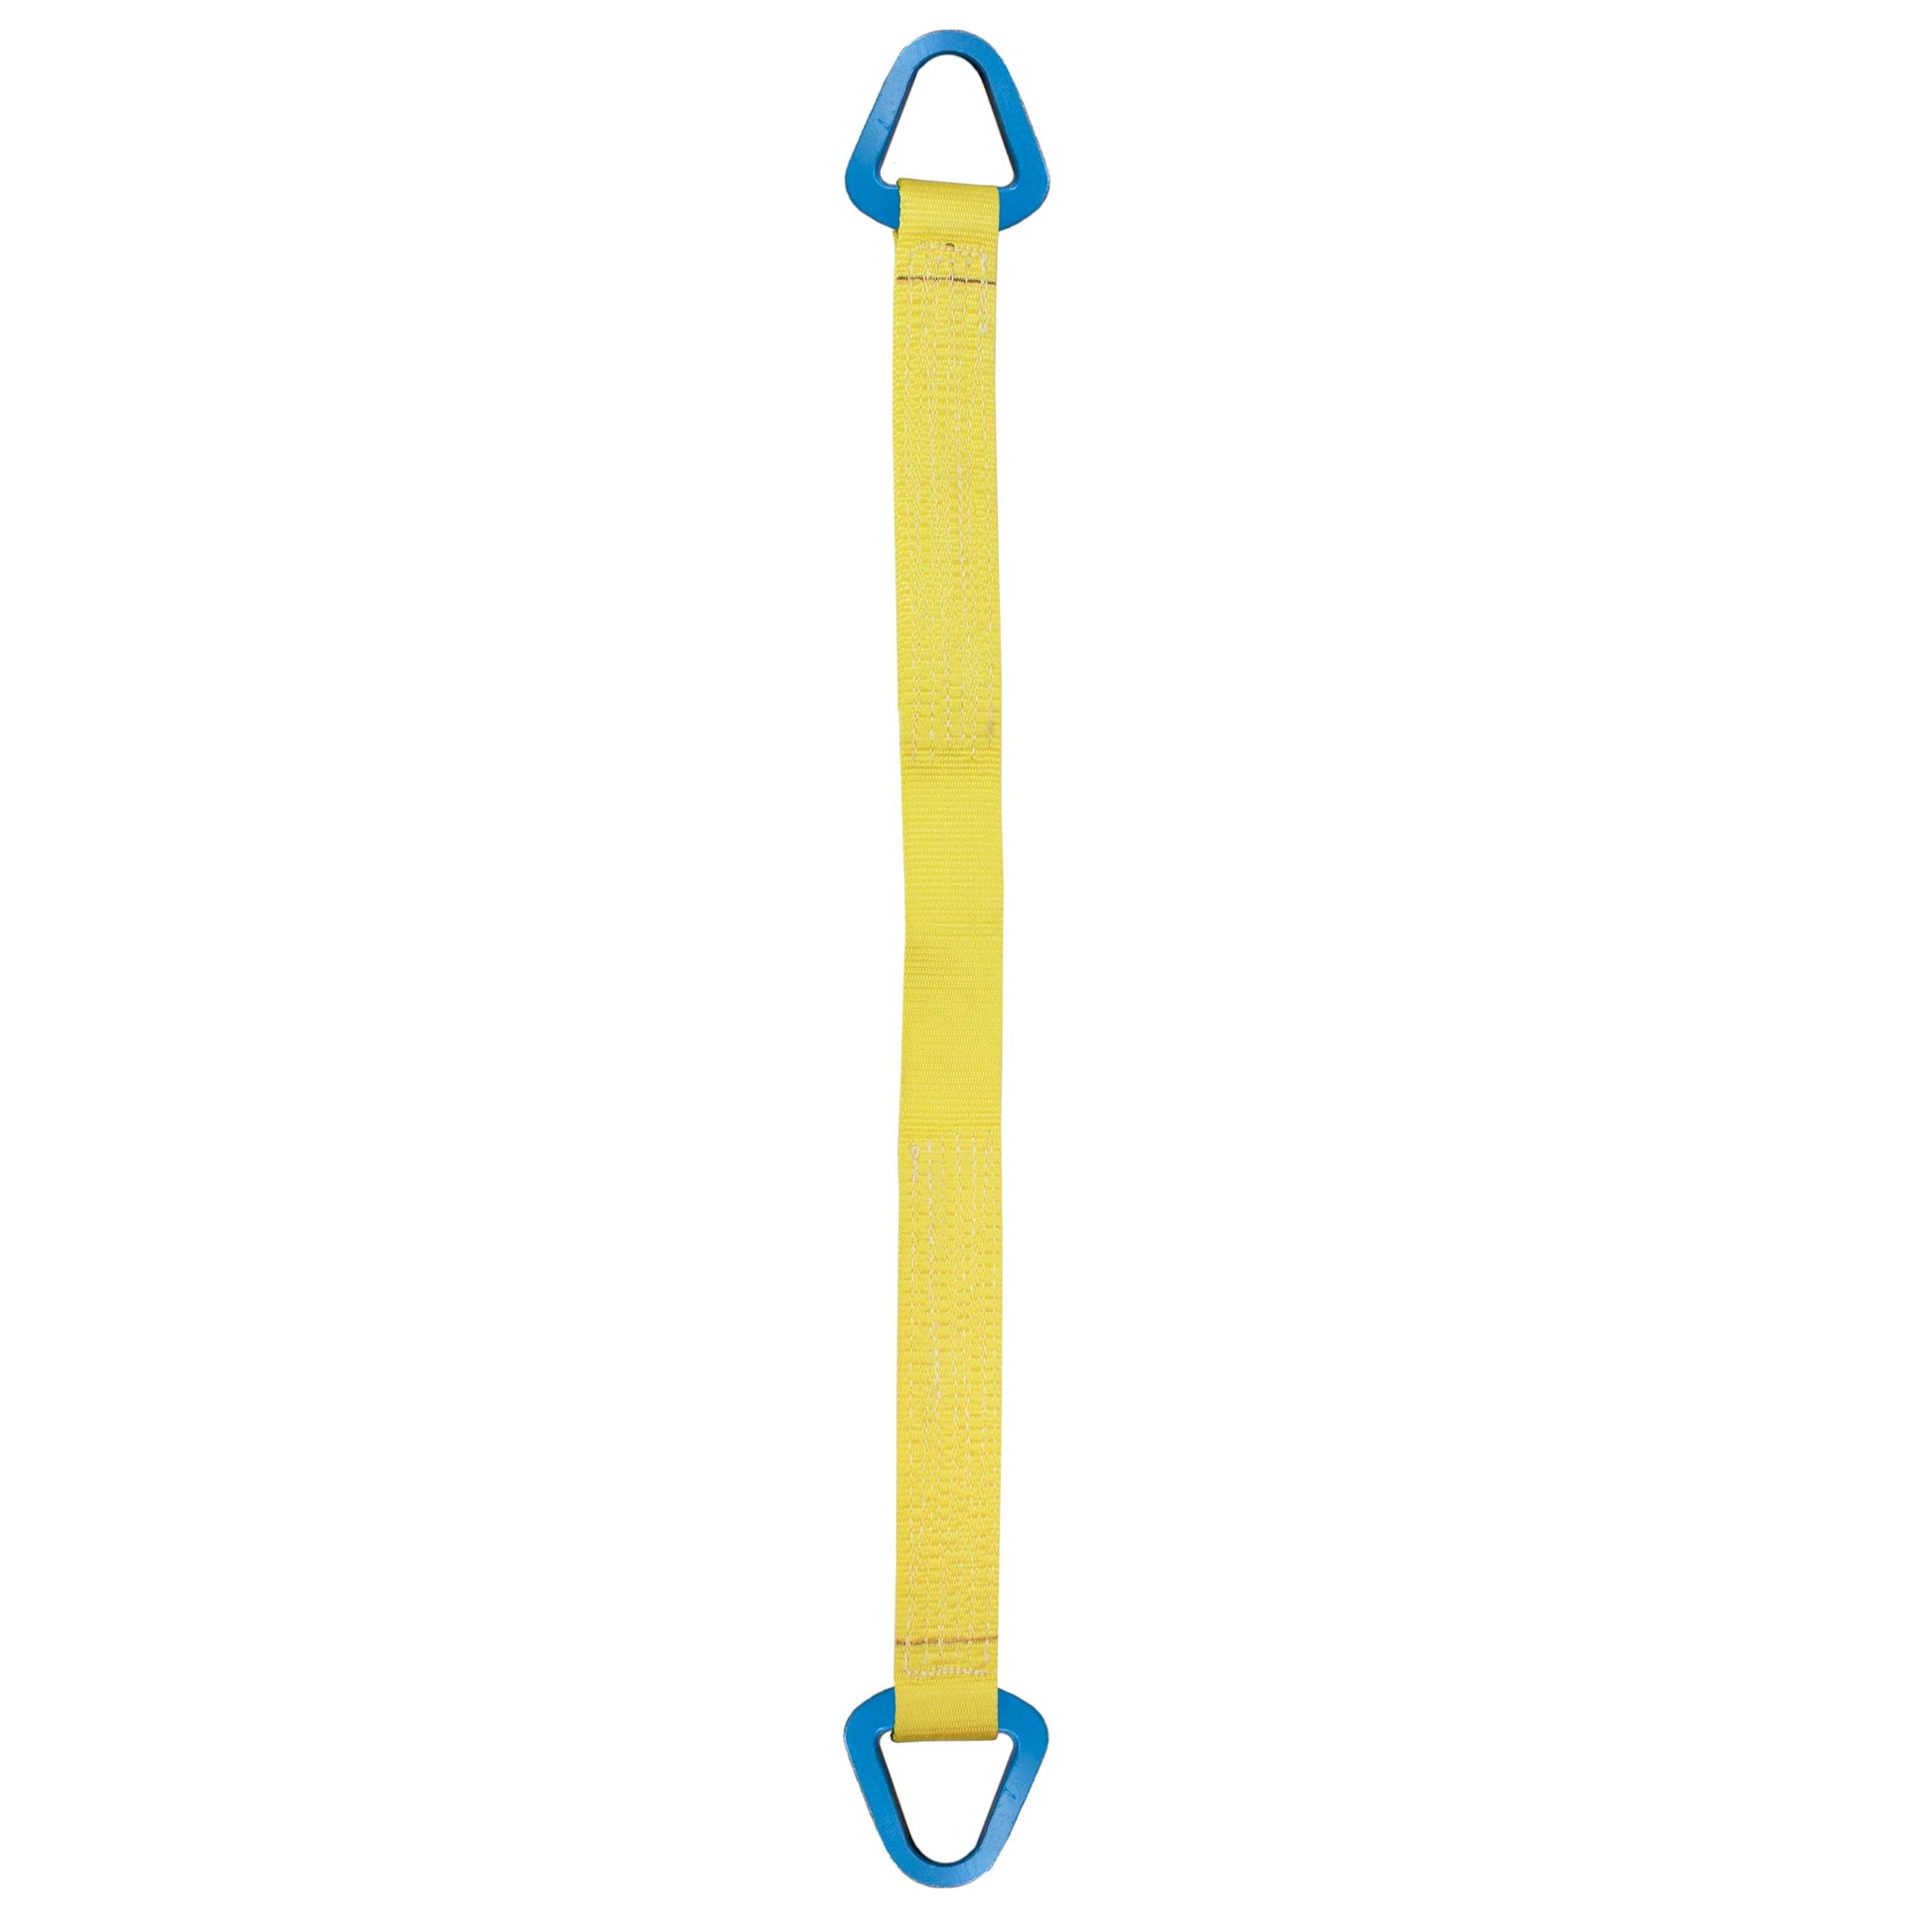 Nylon Lifting Sling Triangle 10 inch x 3 foot 1ply image 1 of 2